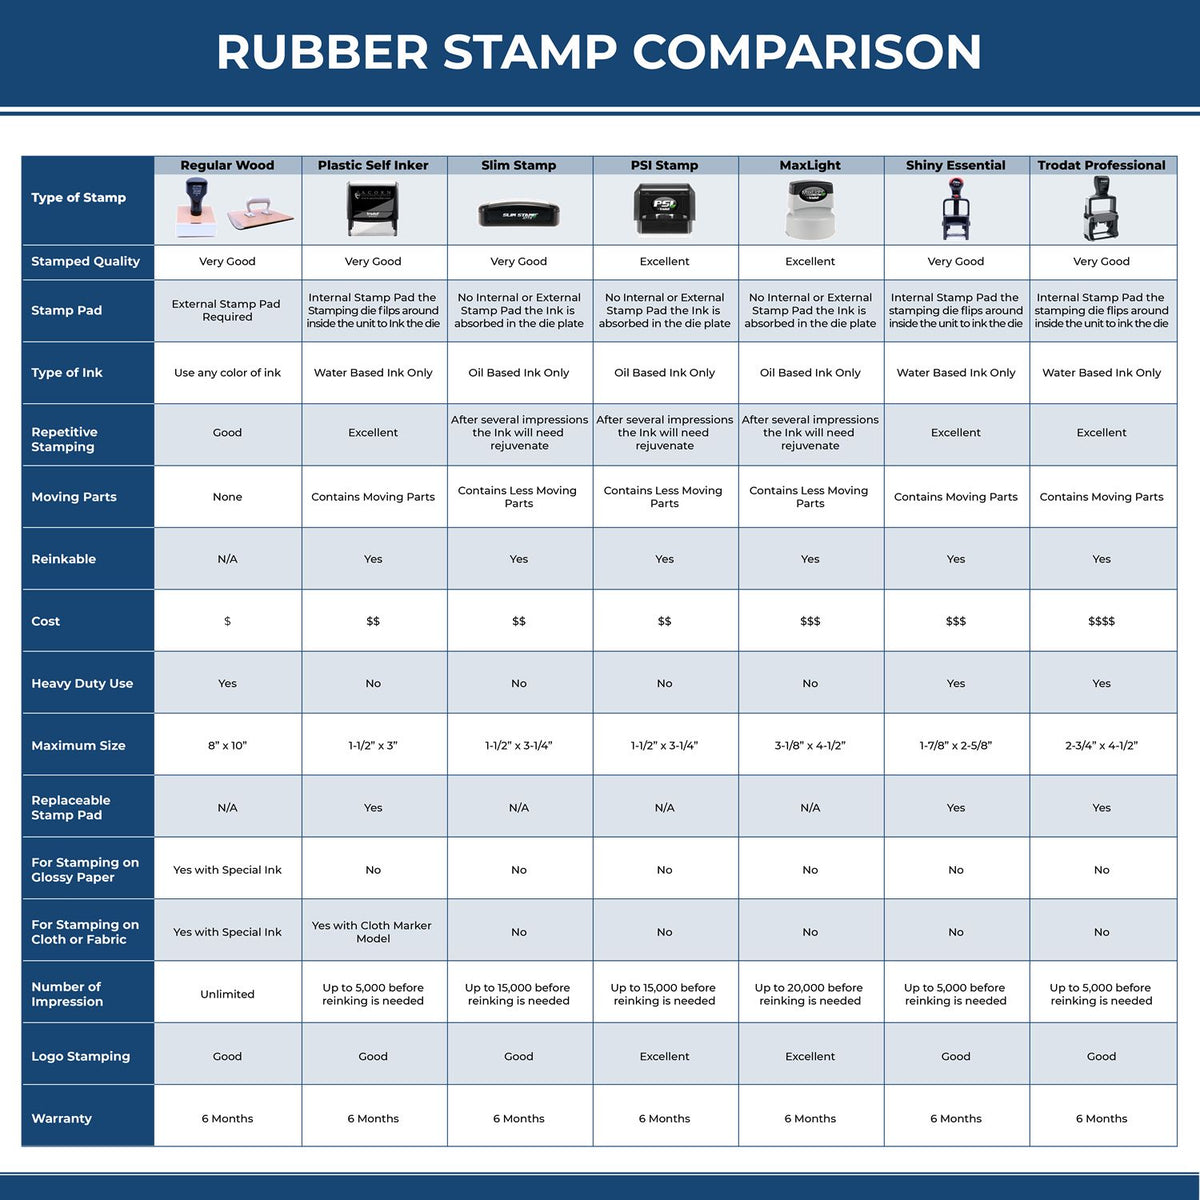 Large School Property Rubber Stamp 4672R Rubber Stamp Comparison